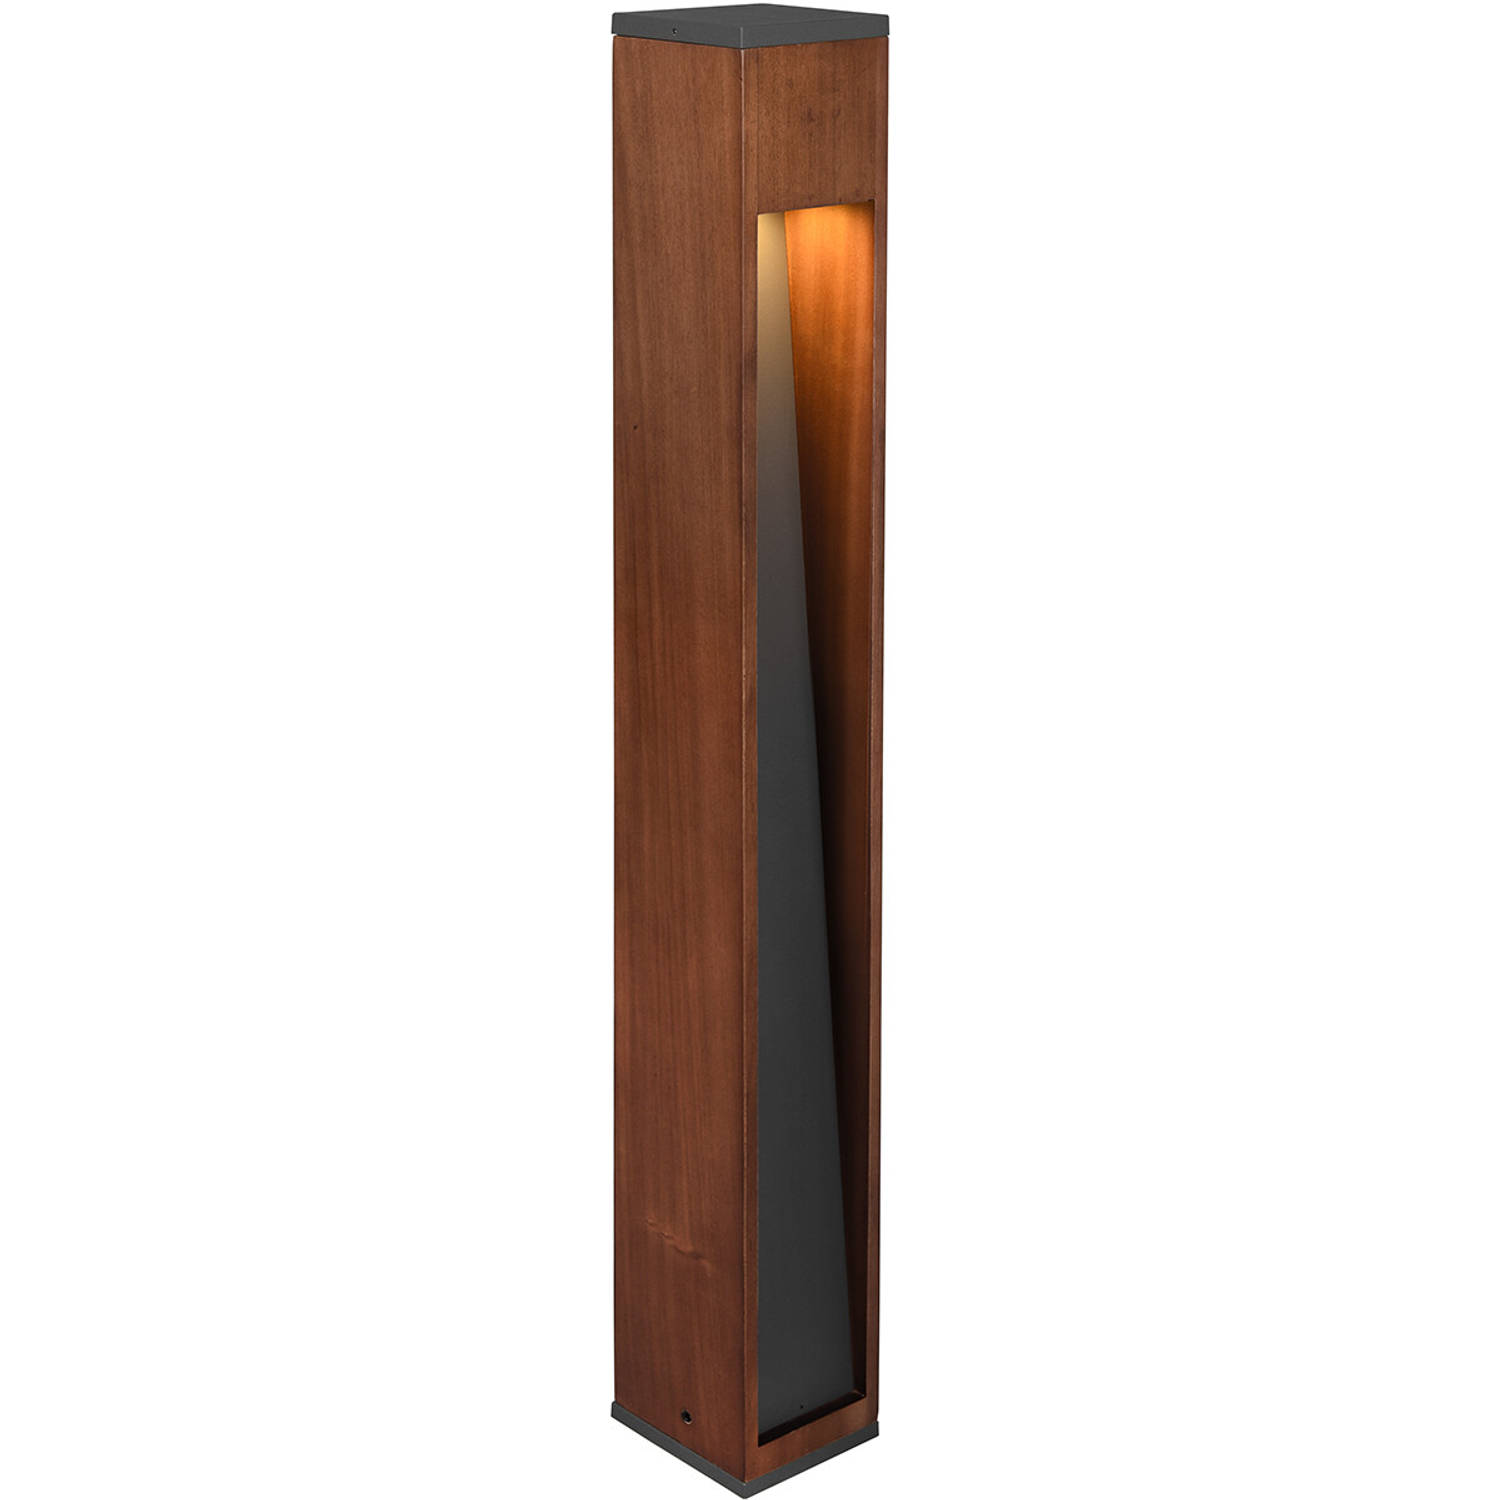 LED Tuinverlichting Staande Buitenlamp Trion Enico XL GU10 Fitting Rechthoek Hout Natuur Hout